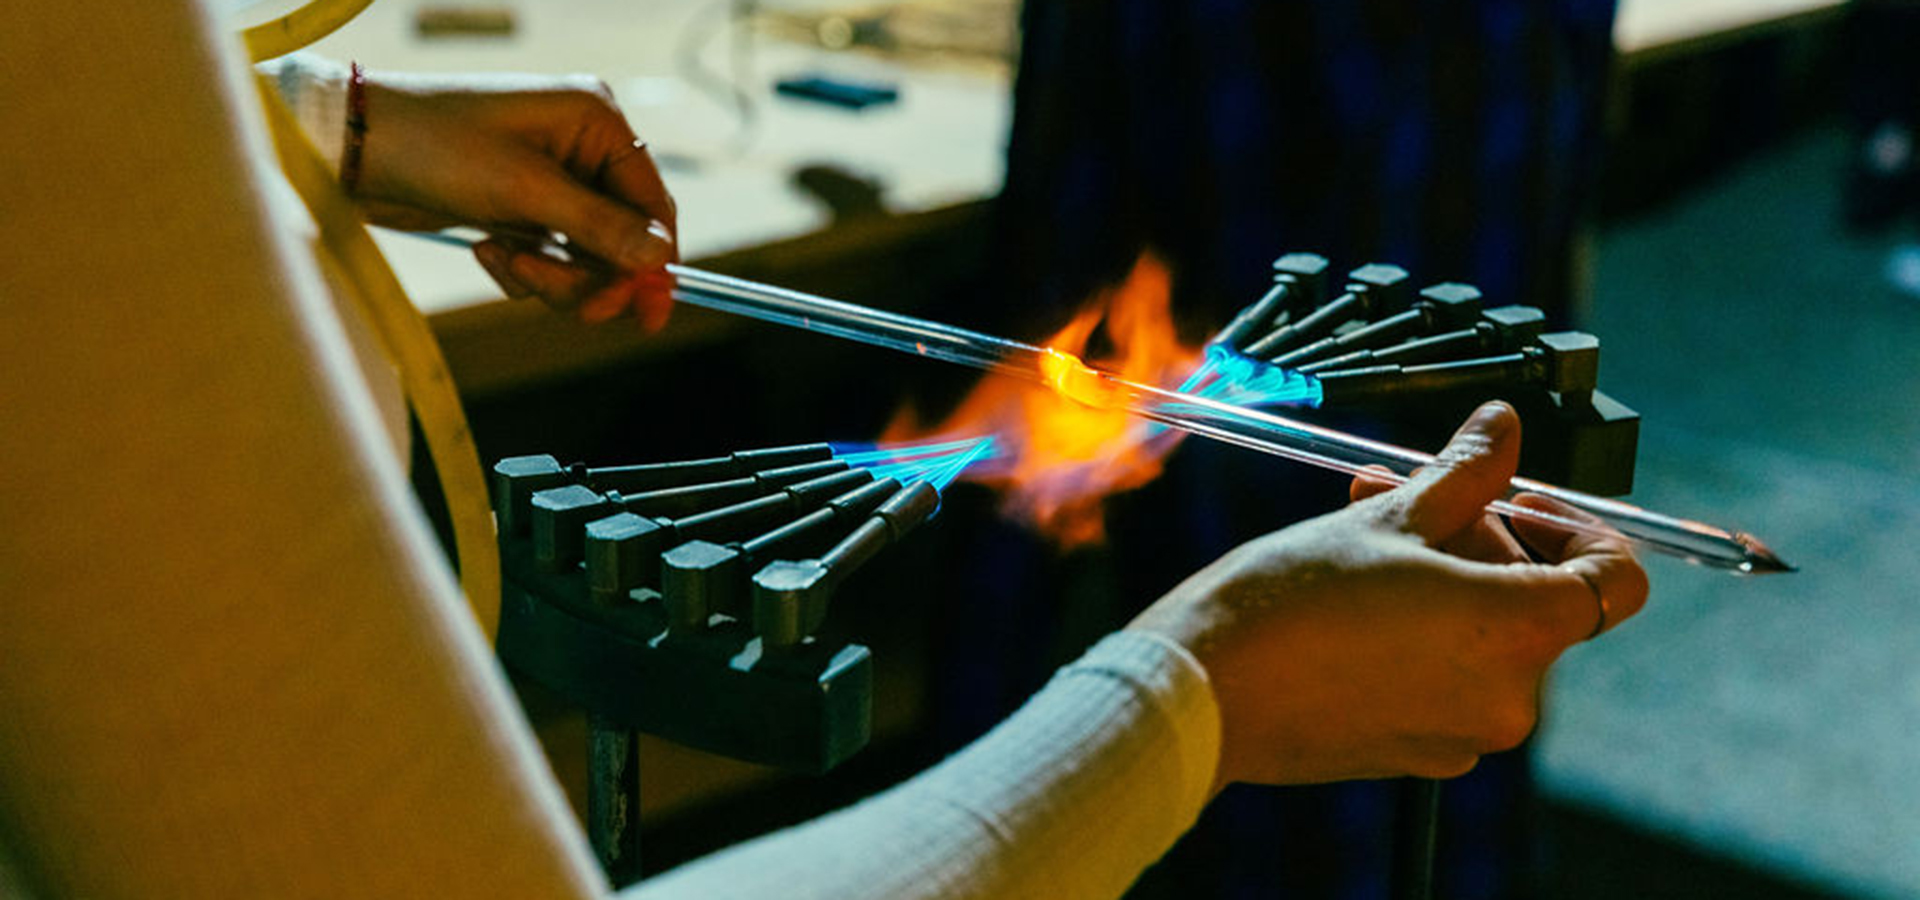 Close up photo of a person's hands holding a thin long piece of glass neon over fire to bend it.